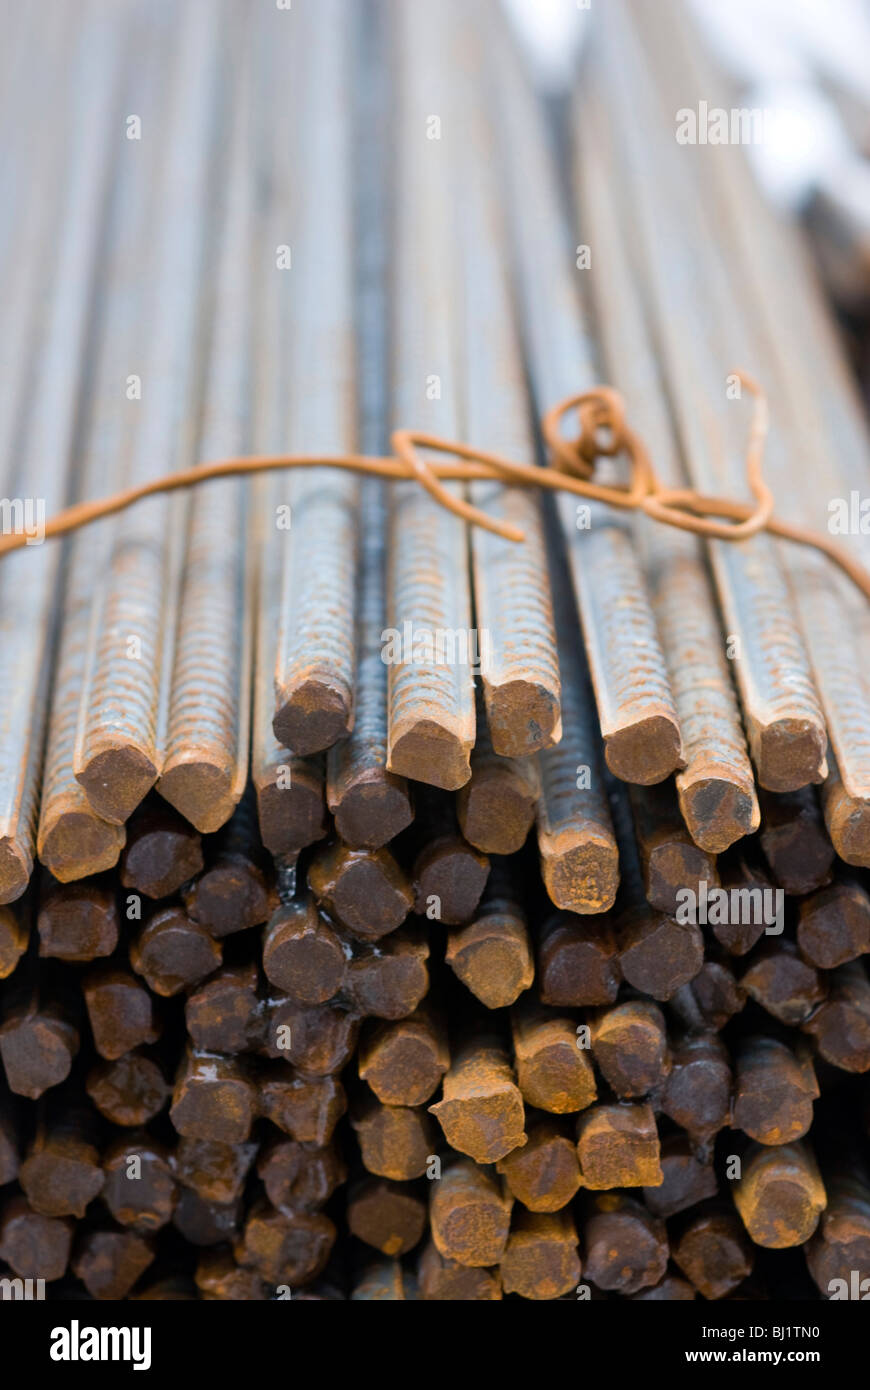 Cross-sectional close-up of Rusty High Tensile Deformed Steel Bar Stock Photo